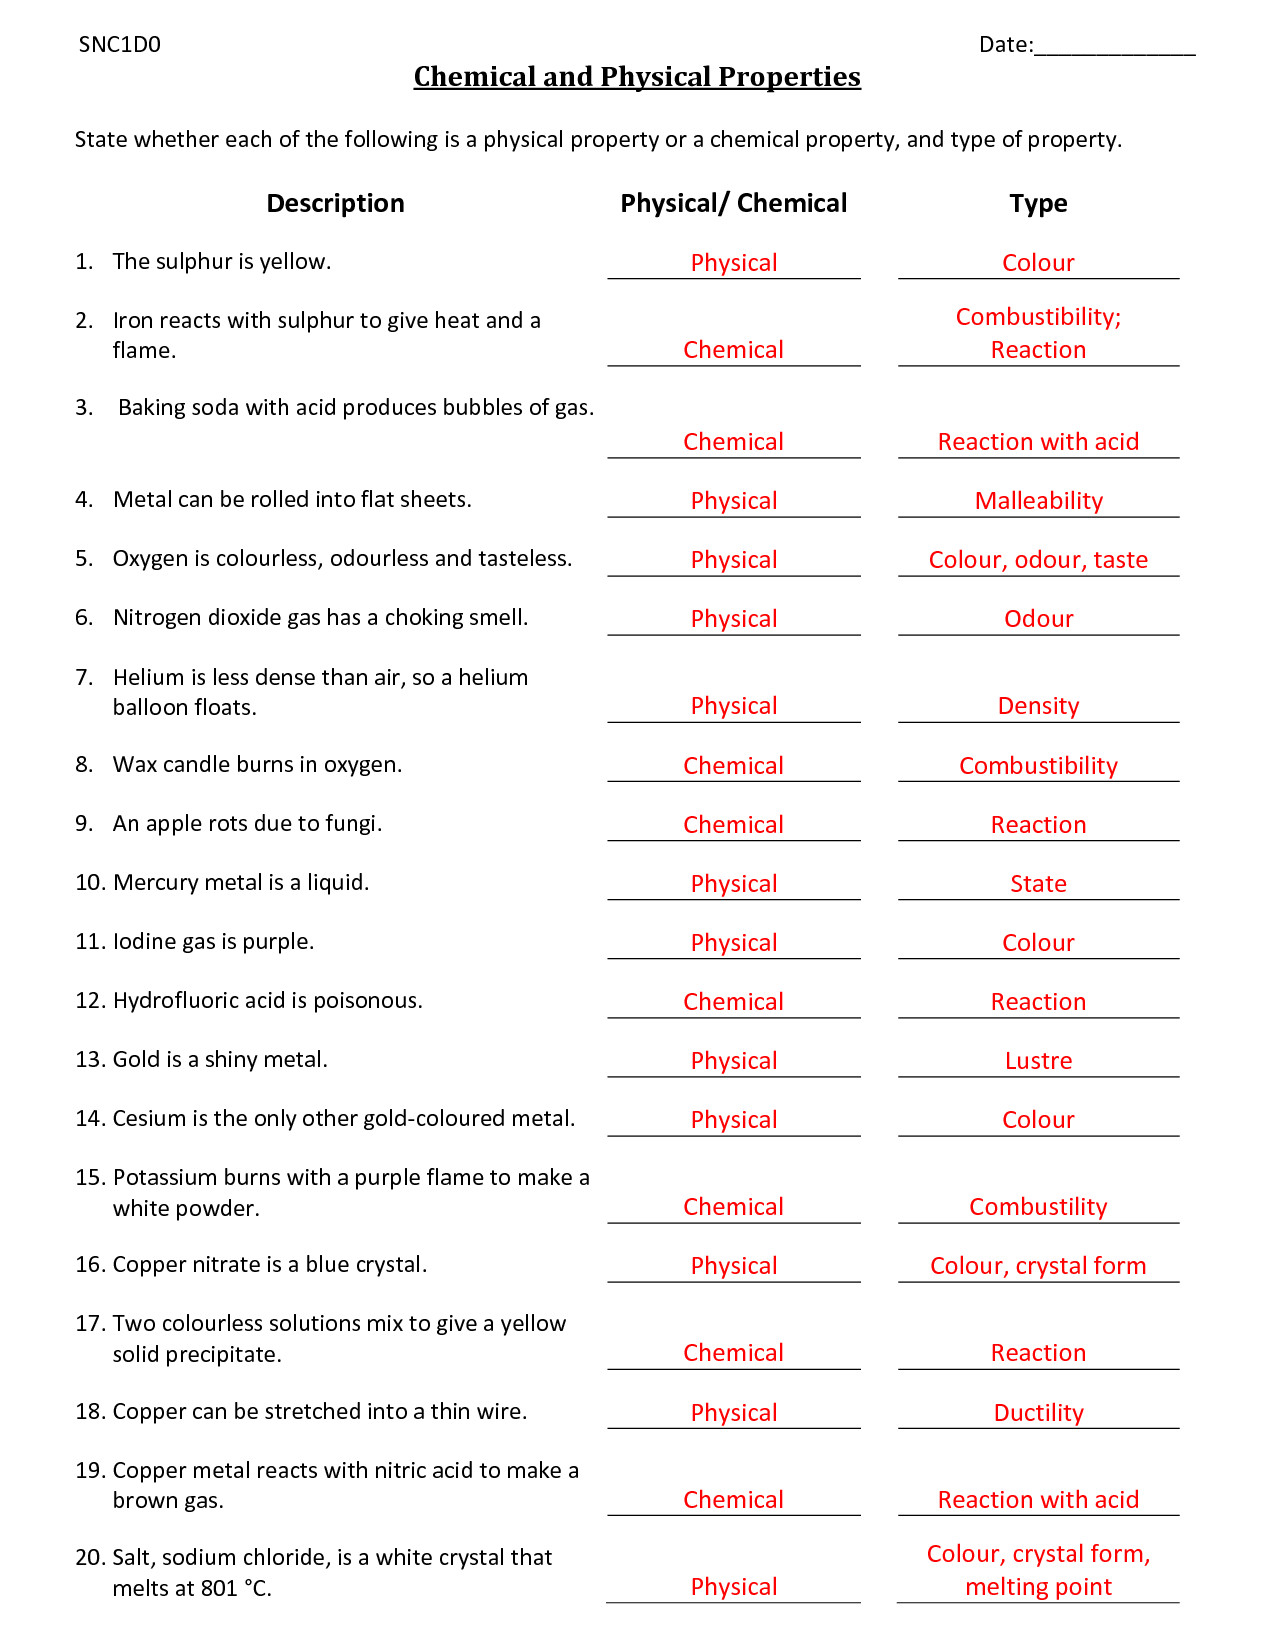 Physical and Chemical Properties Worksheet Lovely Physical Vs Chemical Properties Worksheet Answers